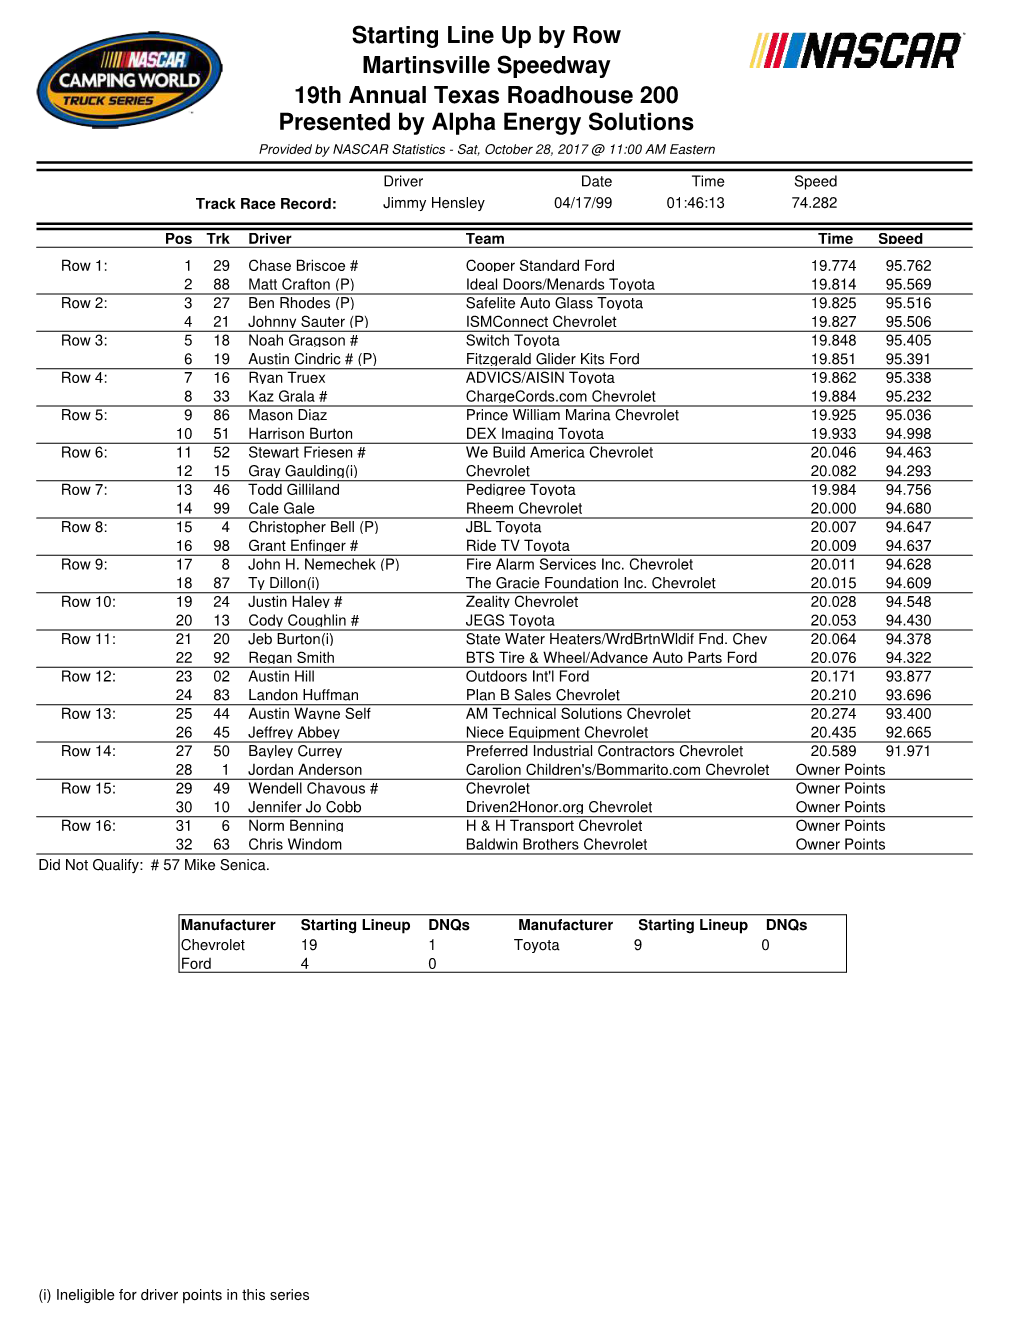 Starting Line up by Row Martinsville Speedway 19Th Annual Texas